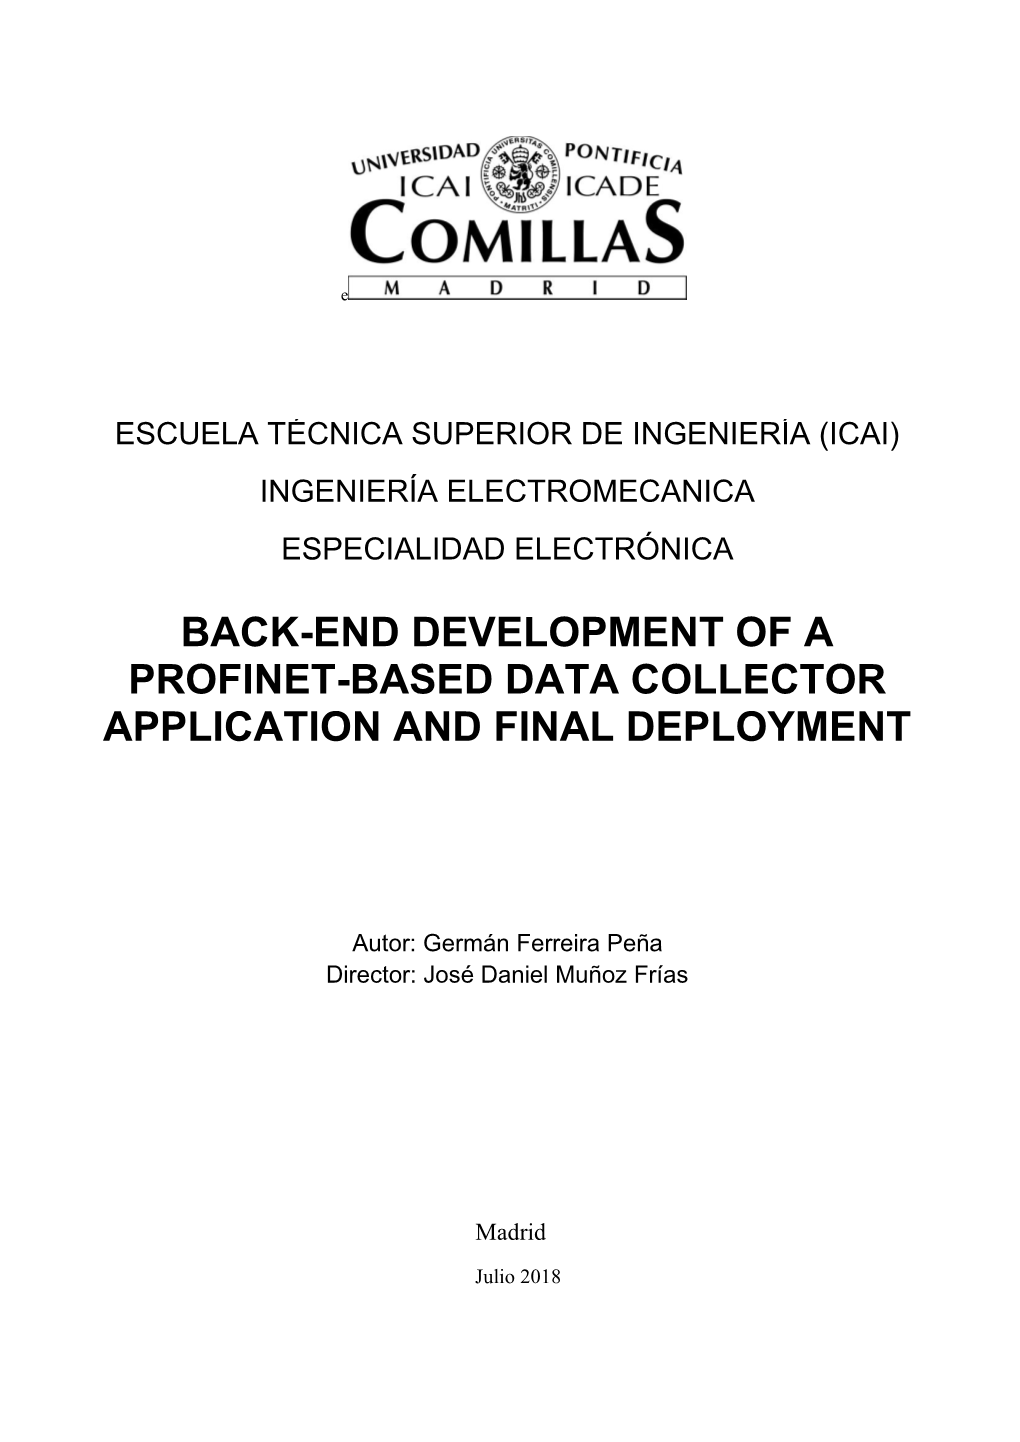 Back-End Development of a Profinet-Based Data Collector Application and Final Deployment